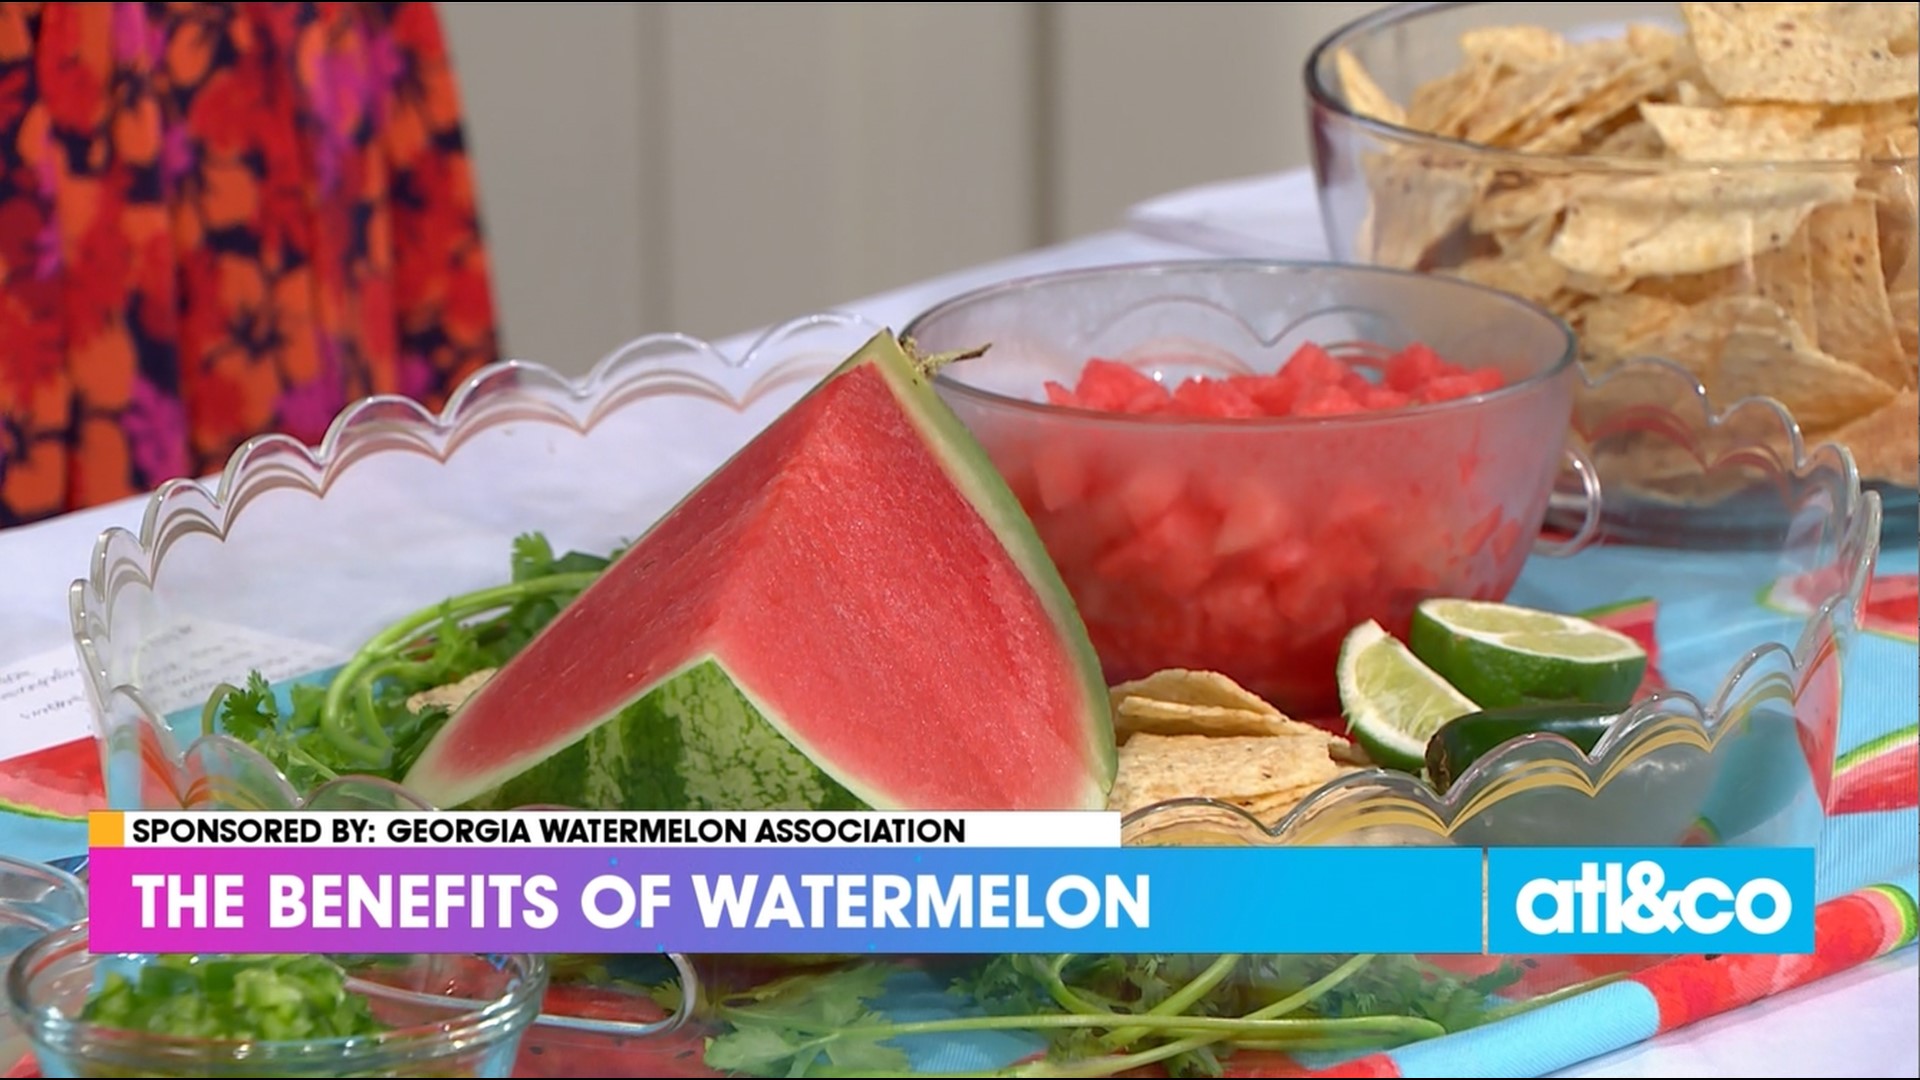 The Georgia Watermelon Queen shares the health benefits of the summer fruit and a sweet recipe.